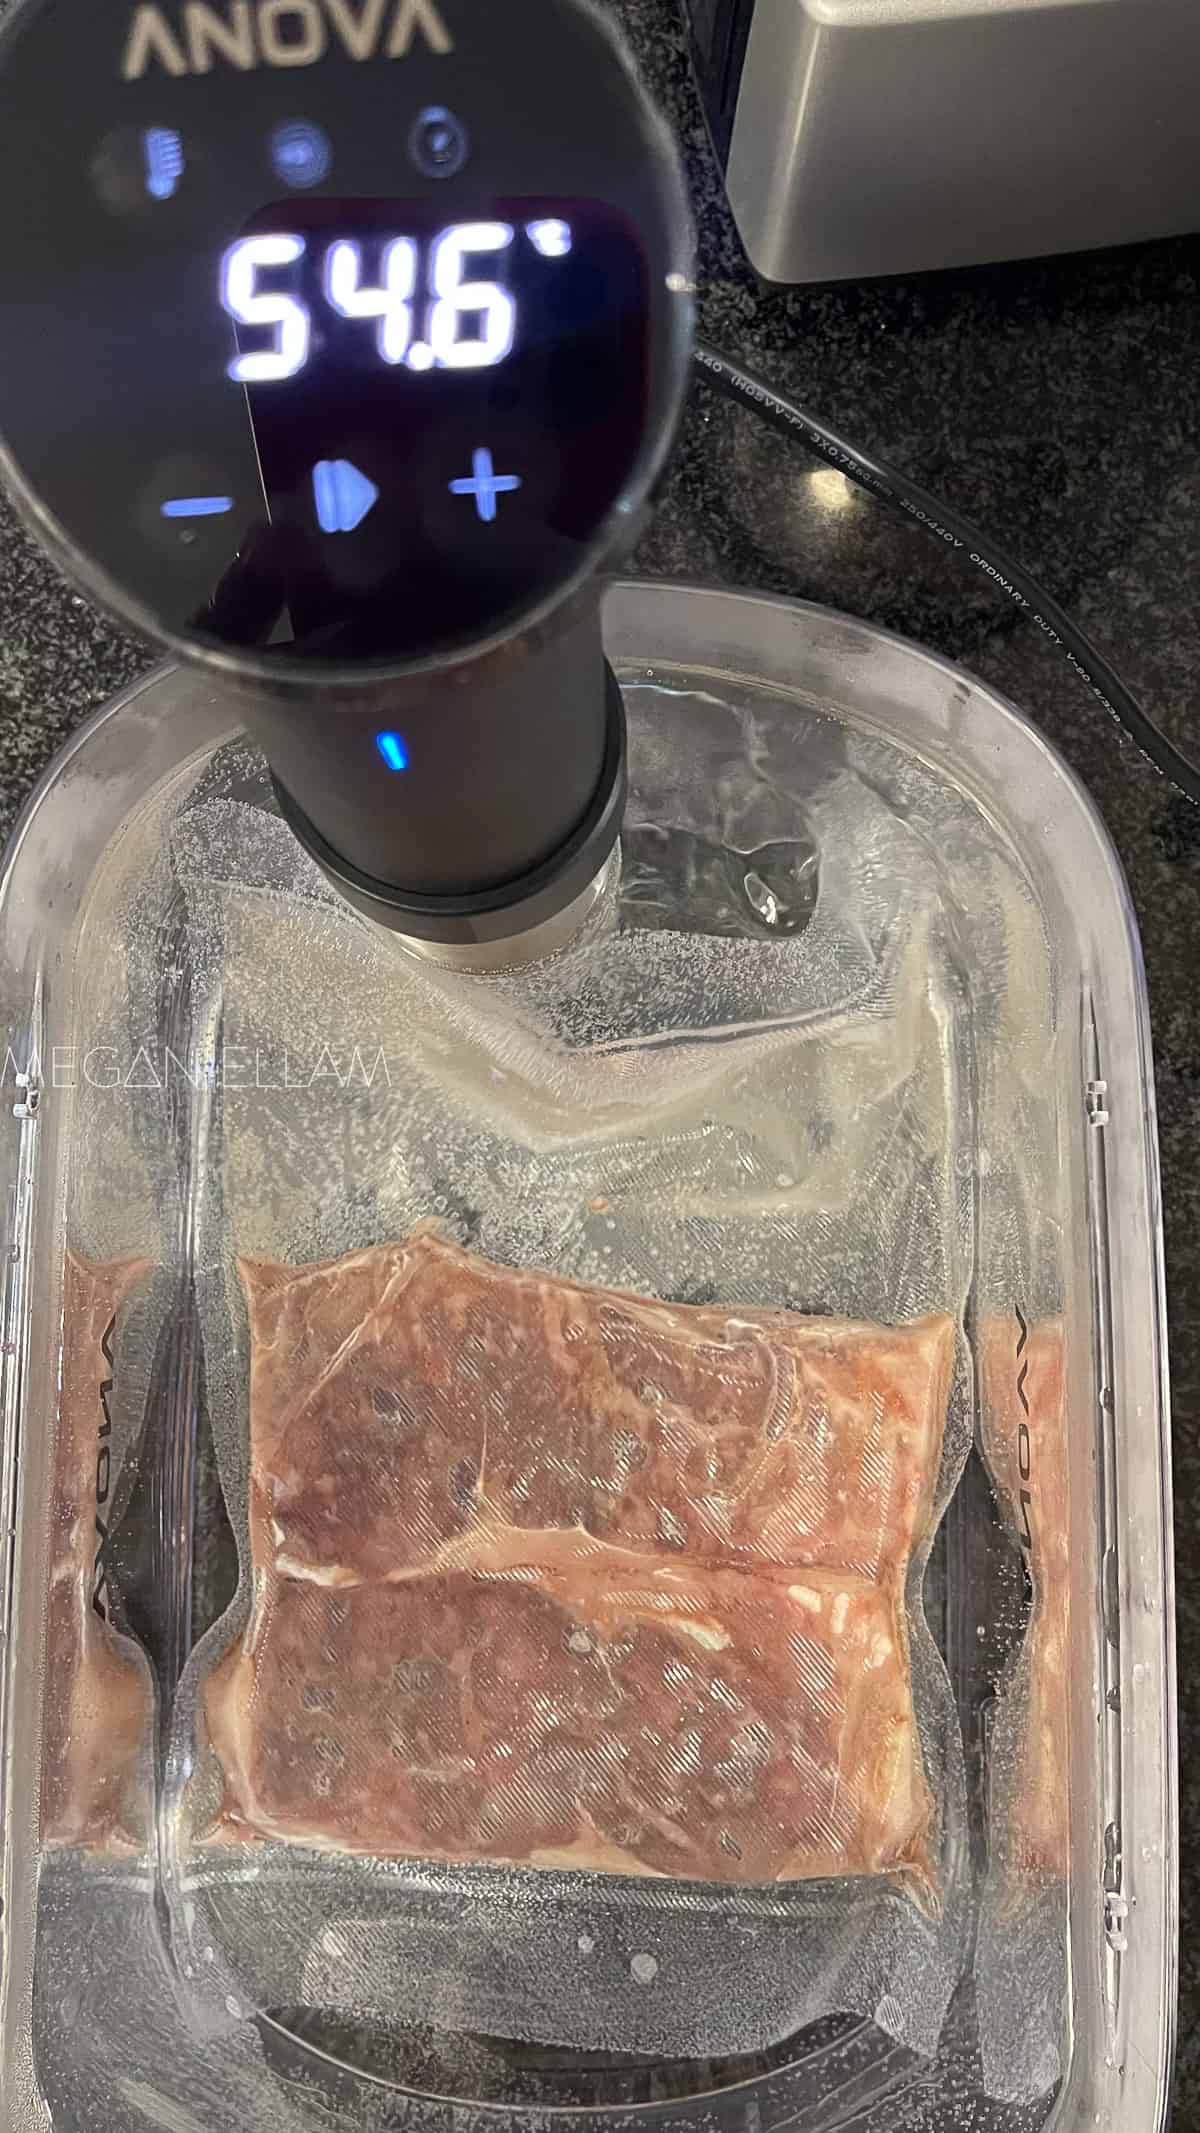 cooked steak in a water bath.